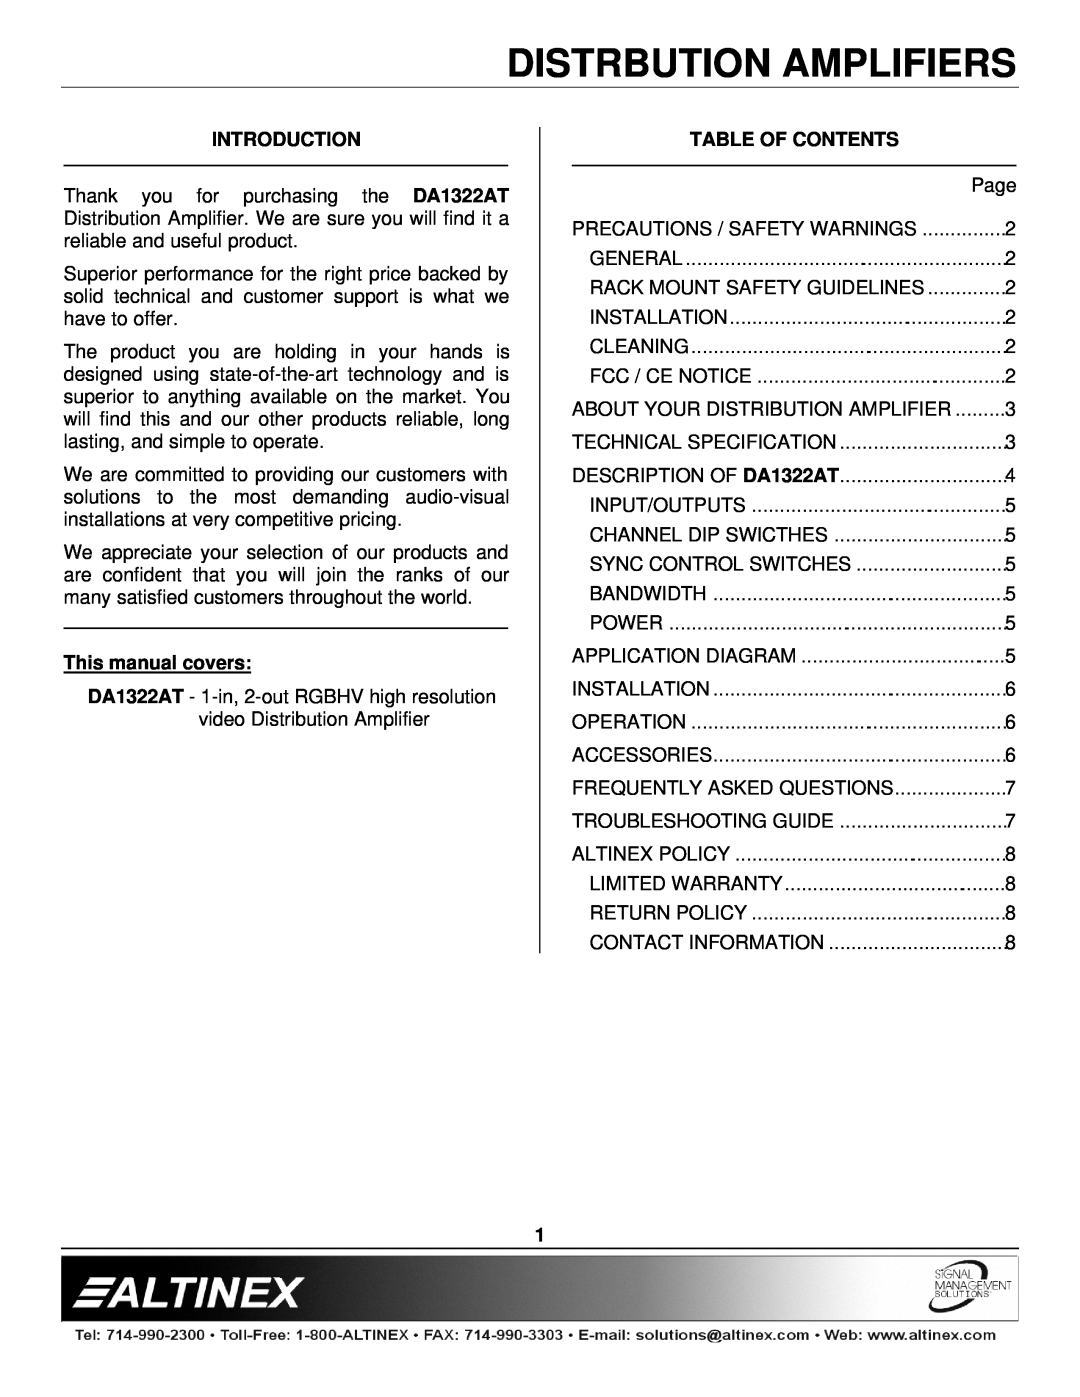 Altinex DA1322AT Distrbution Amplifiers, Introduction, This manual covers, Table Of Contents 